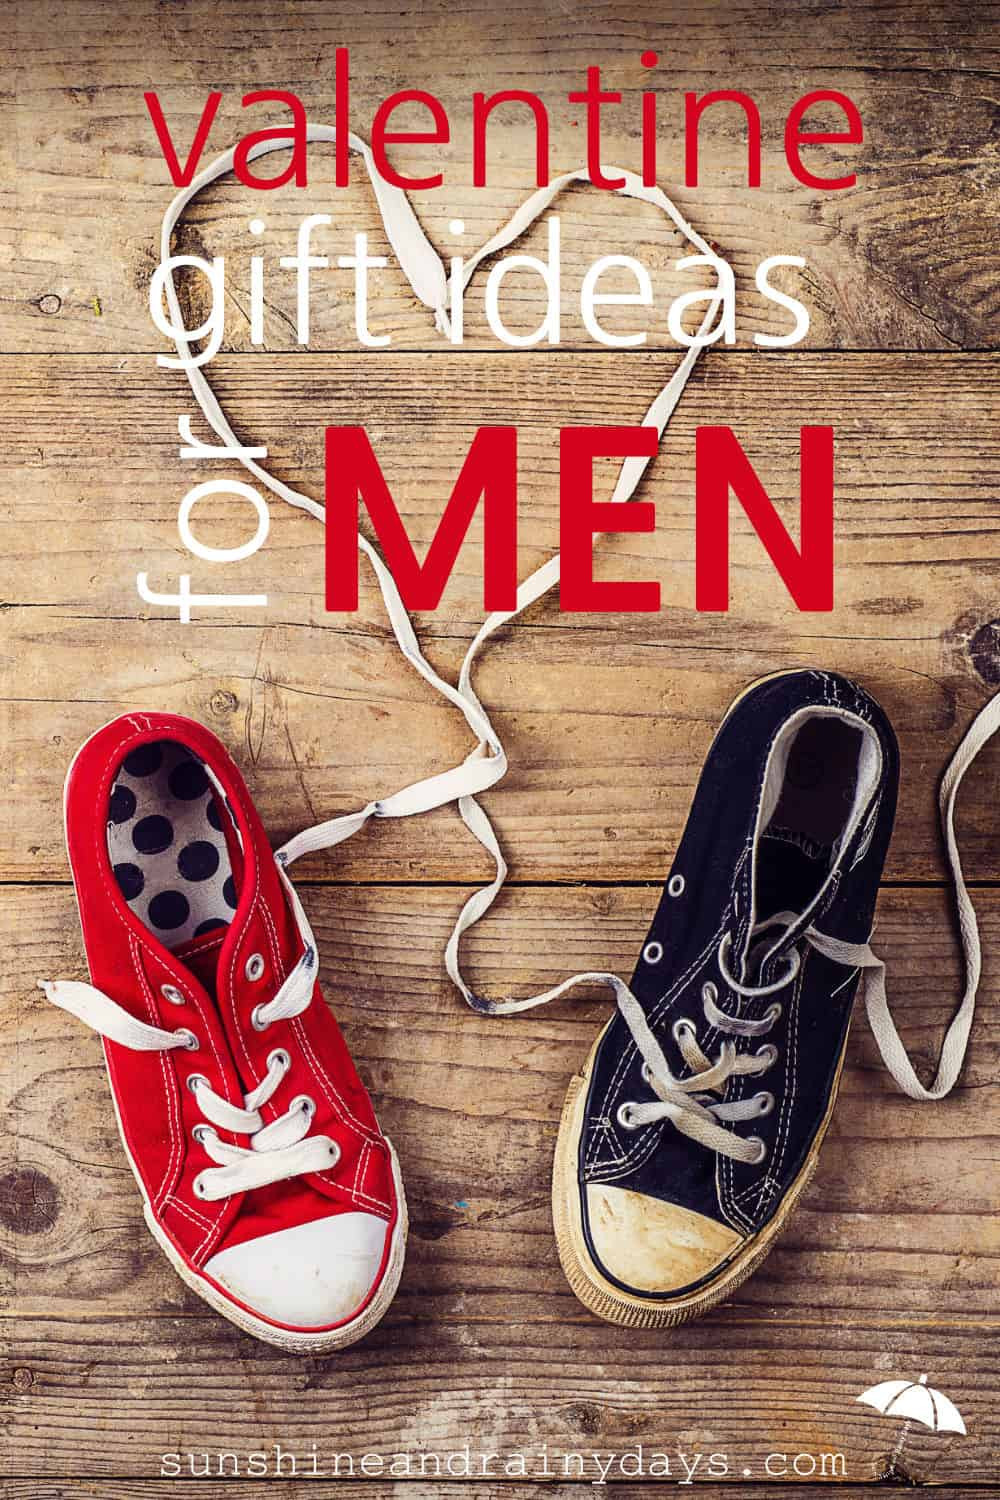 Gift Ideas For Valentines
 Valentine Gift Ideas For Men Sunshine and Rainy Days